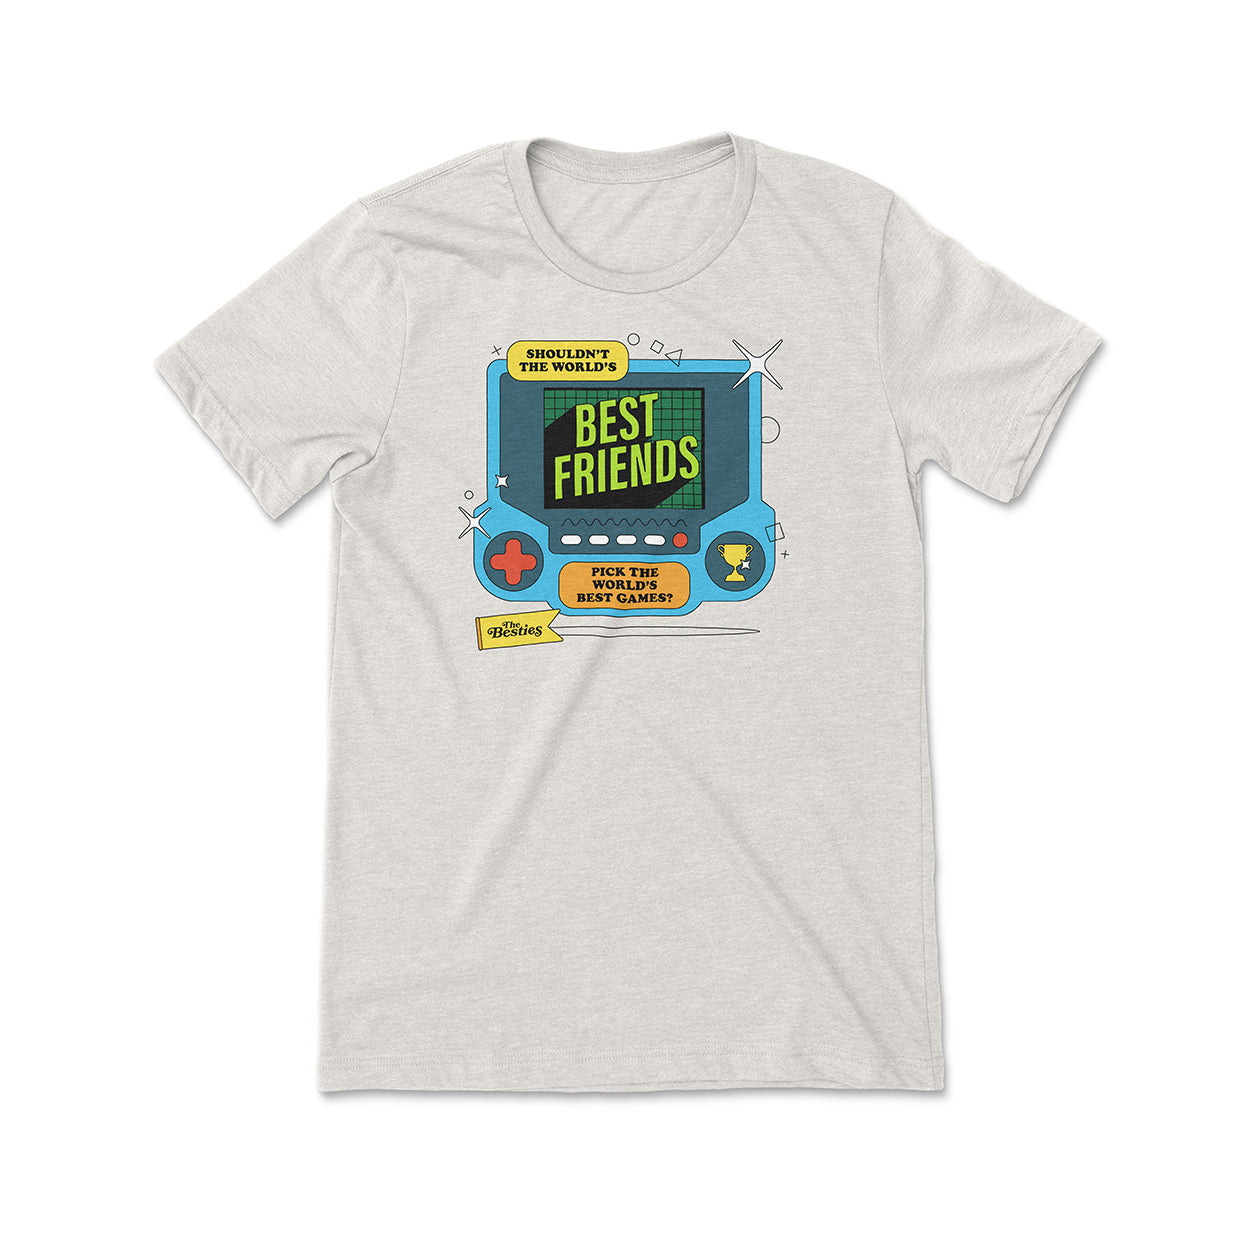 A t-shirt with a graphic of a blue game system. It says, “Shouldn’t the world’s best friends pick the world’s best games?” There are circles, squares, and triangles around the game system. Below the game system is a yellow banner that says, “The Besties”.